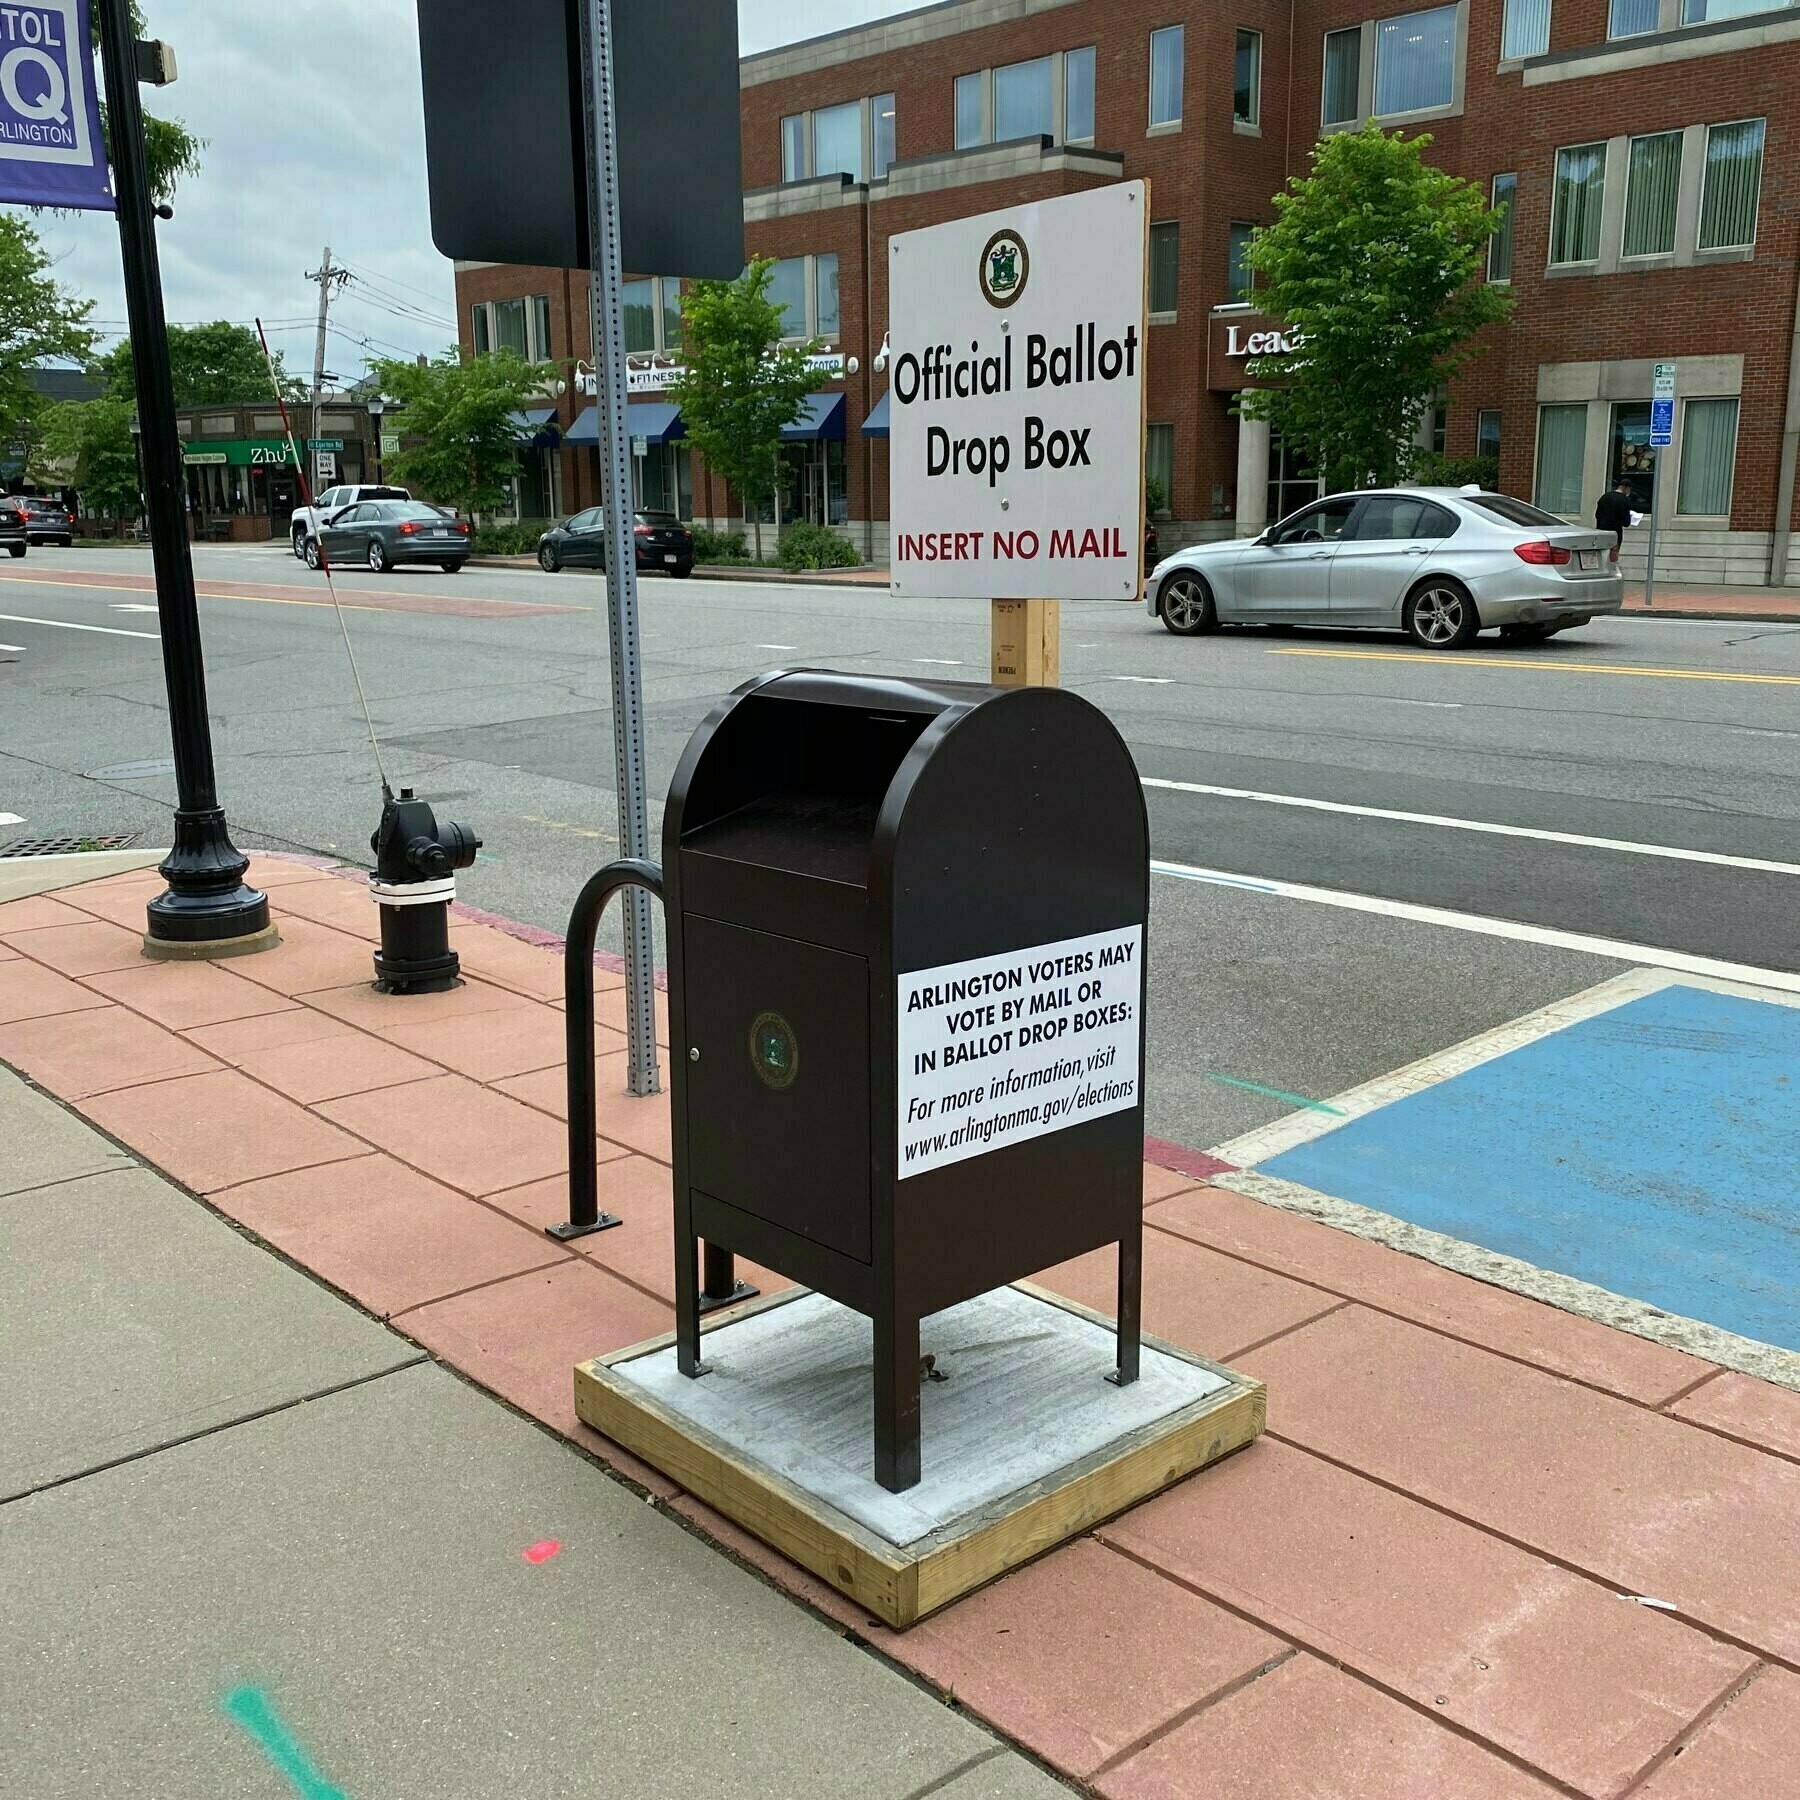 public drop box for official coting ballots